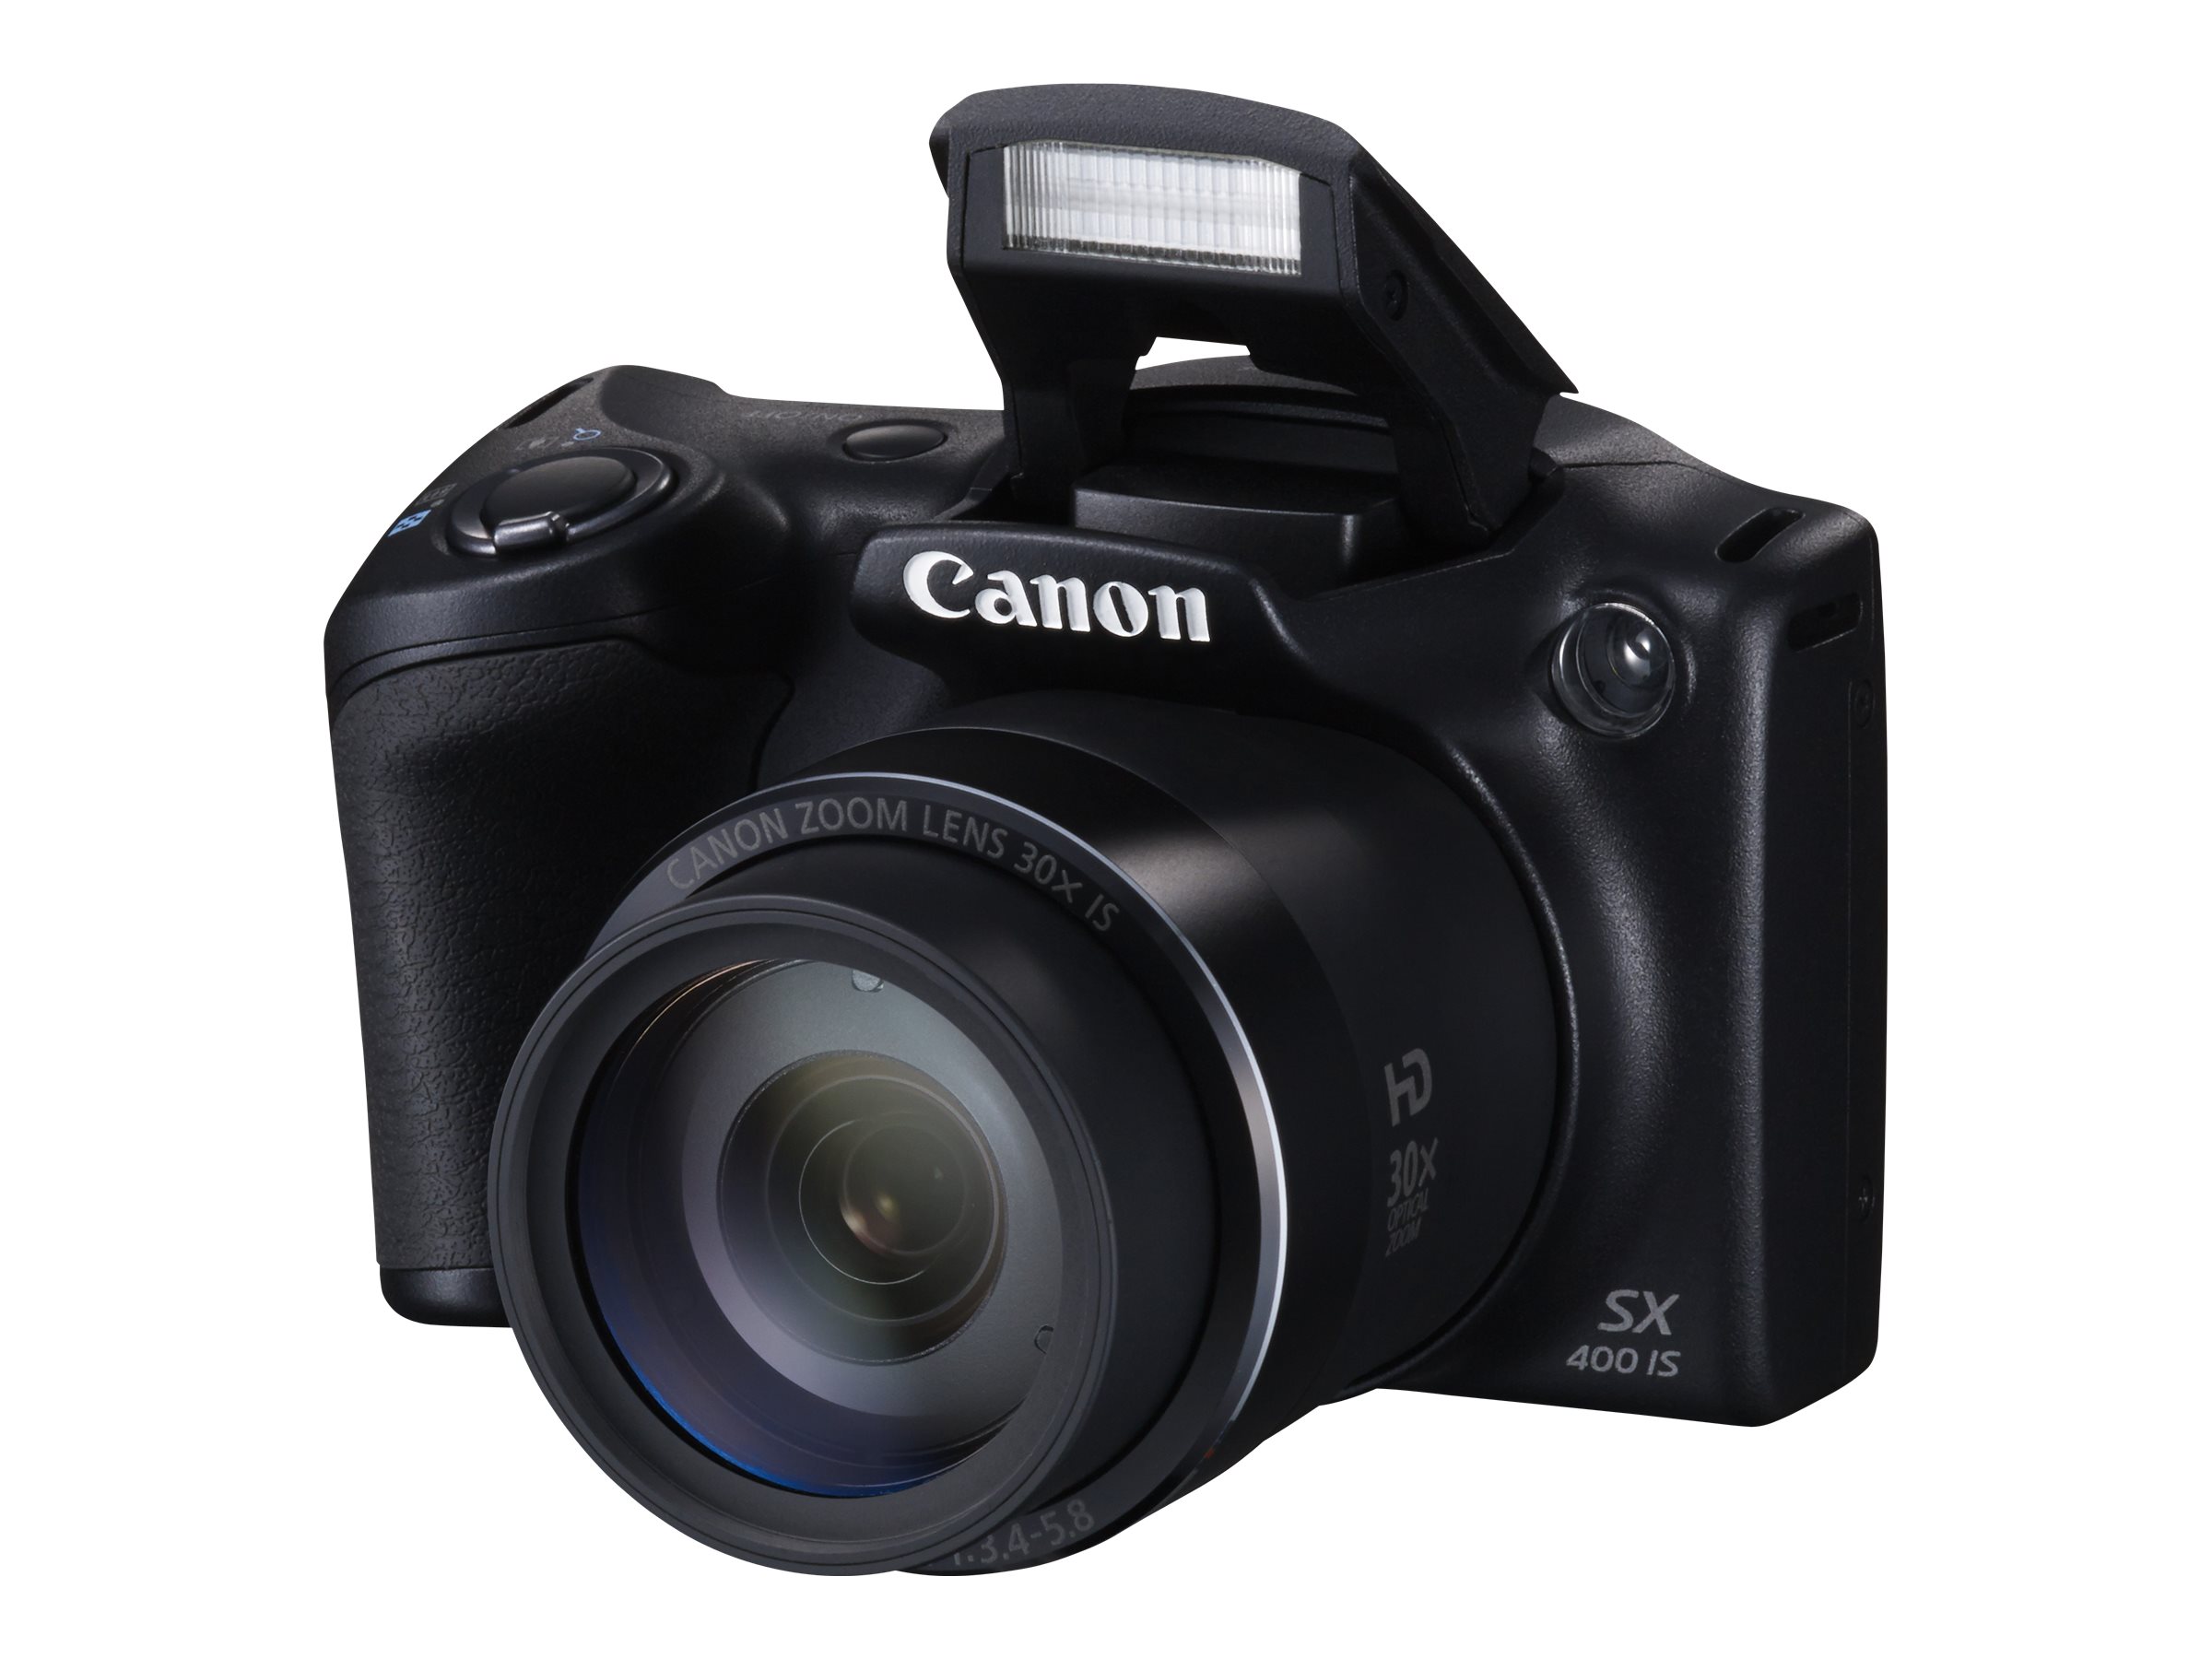 Canon PowerShot SX400 IS - Digital camera - compact - 16.0 MP - 720p - 30x optical zoom - black - image 1 of 9